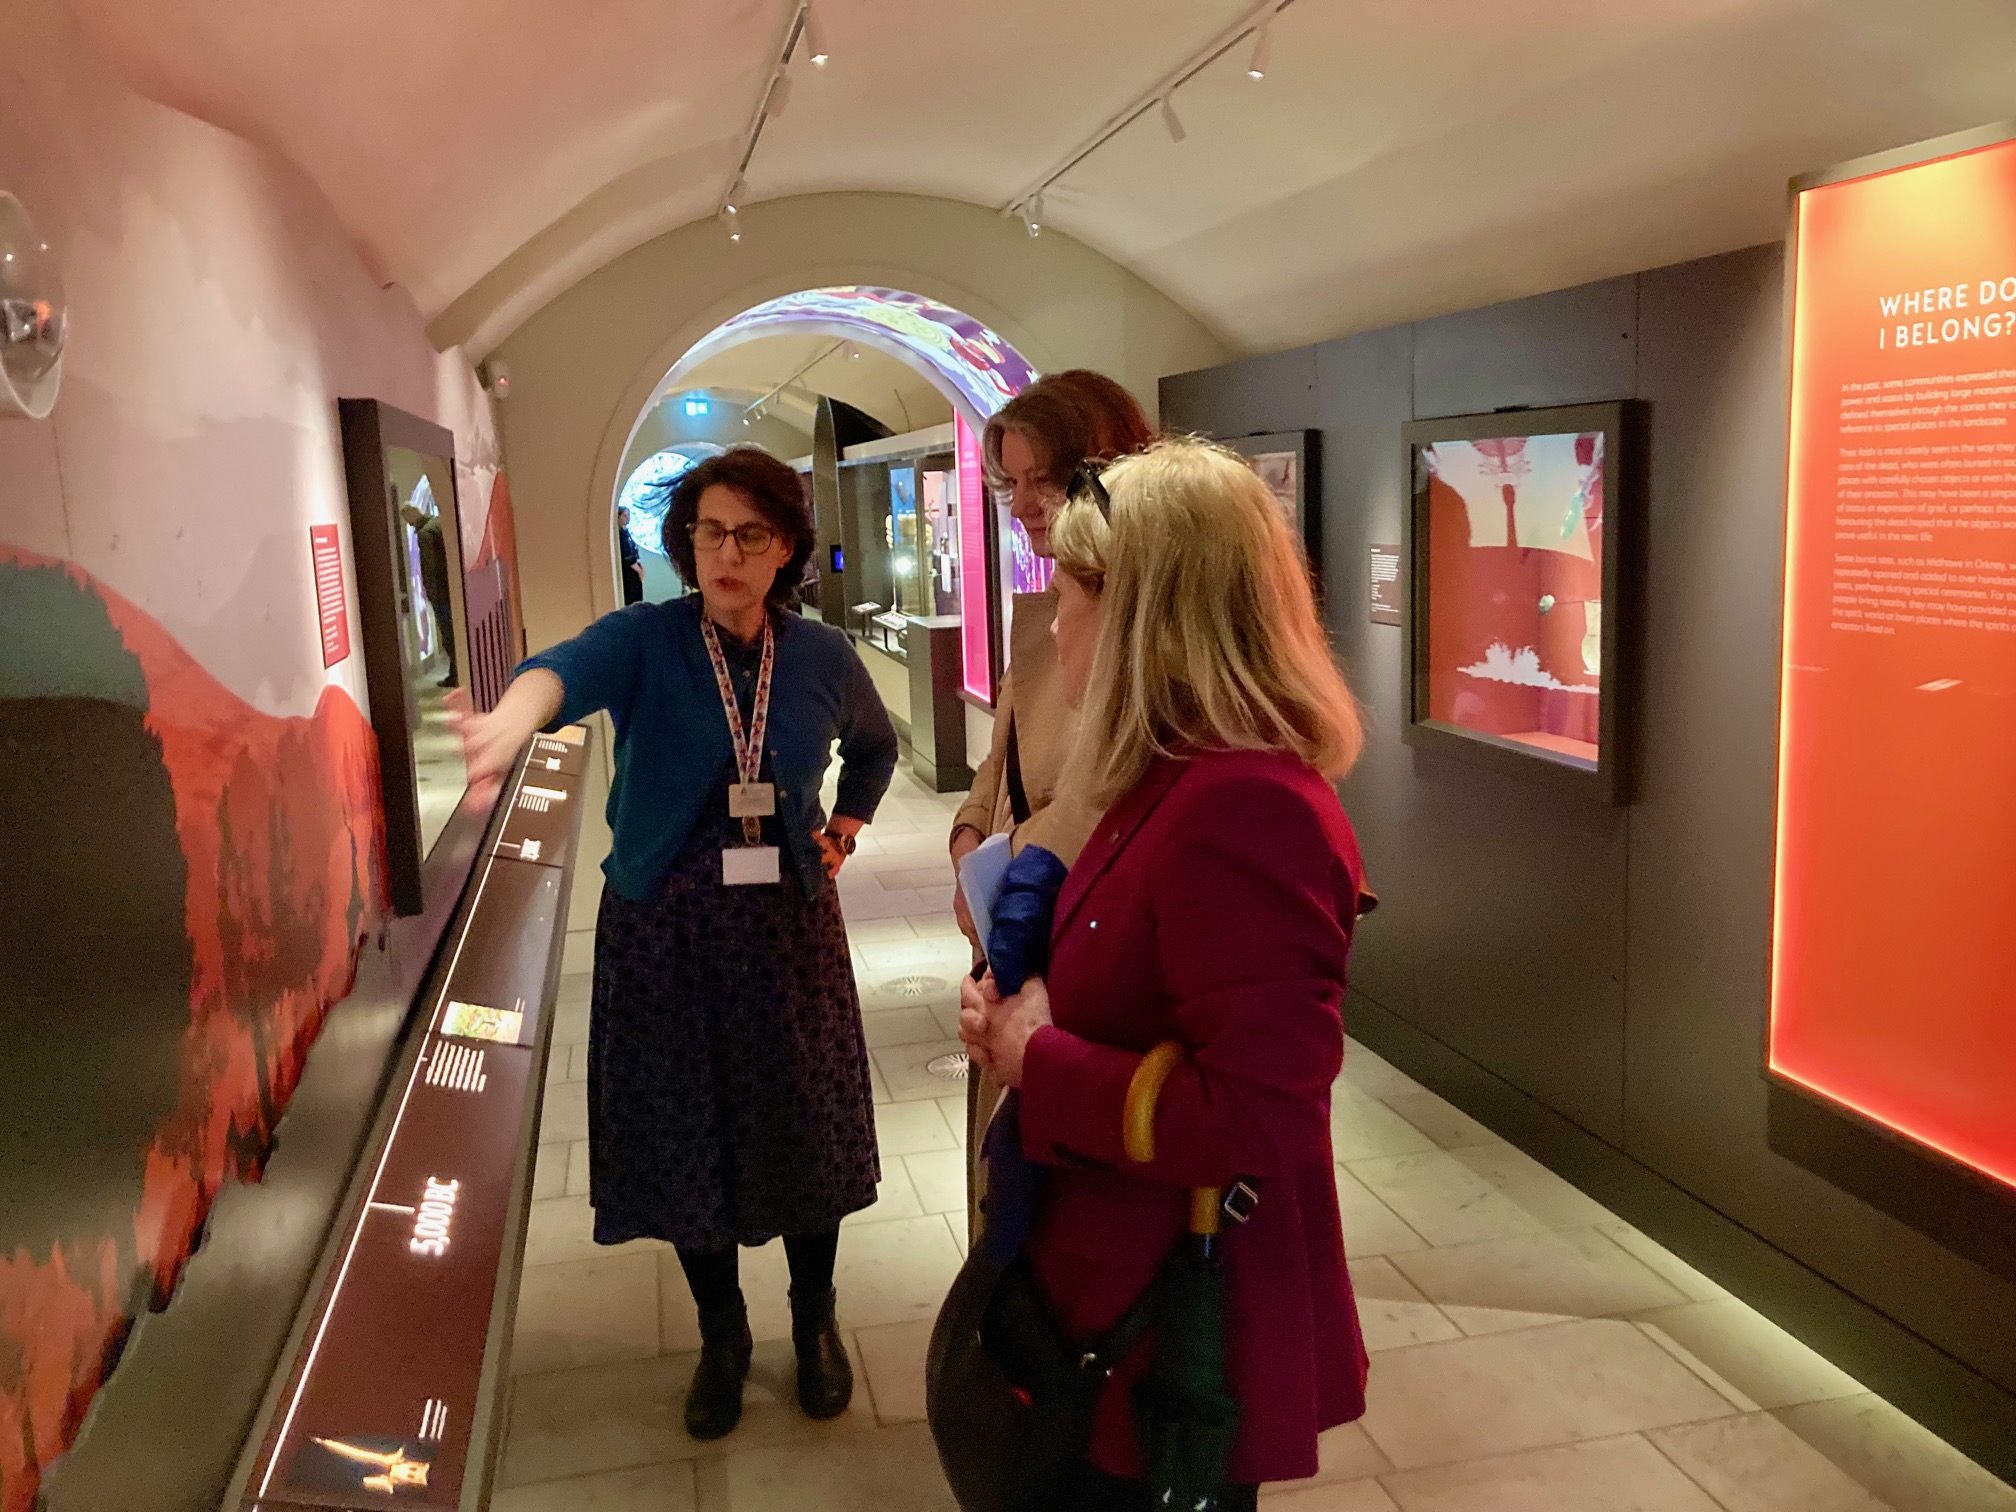 Three people stand in a warmly-lit museum corridor with glass cabinets displaying archaeological artefacts. One of the three is explaining a timeline on the wall to the other two people. The date 5000BC is visible.